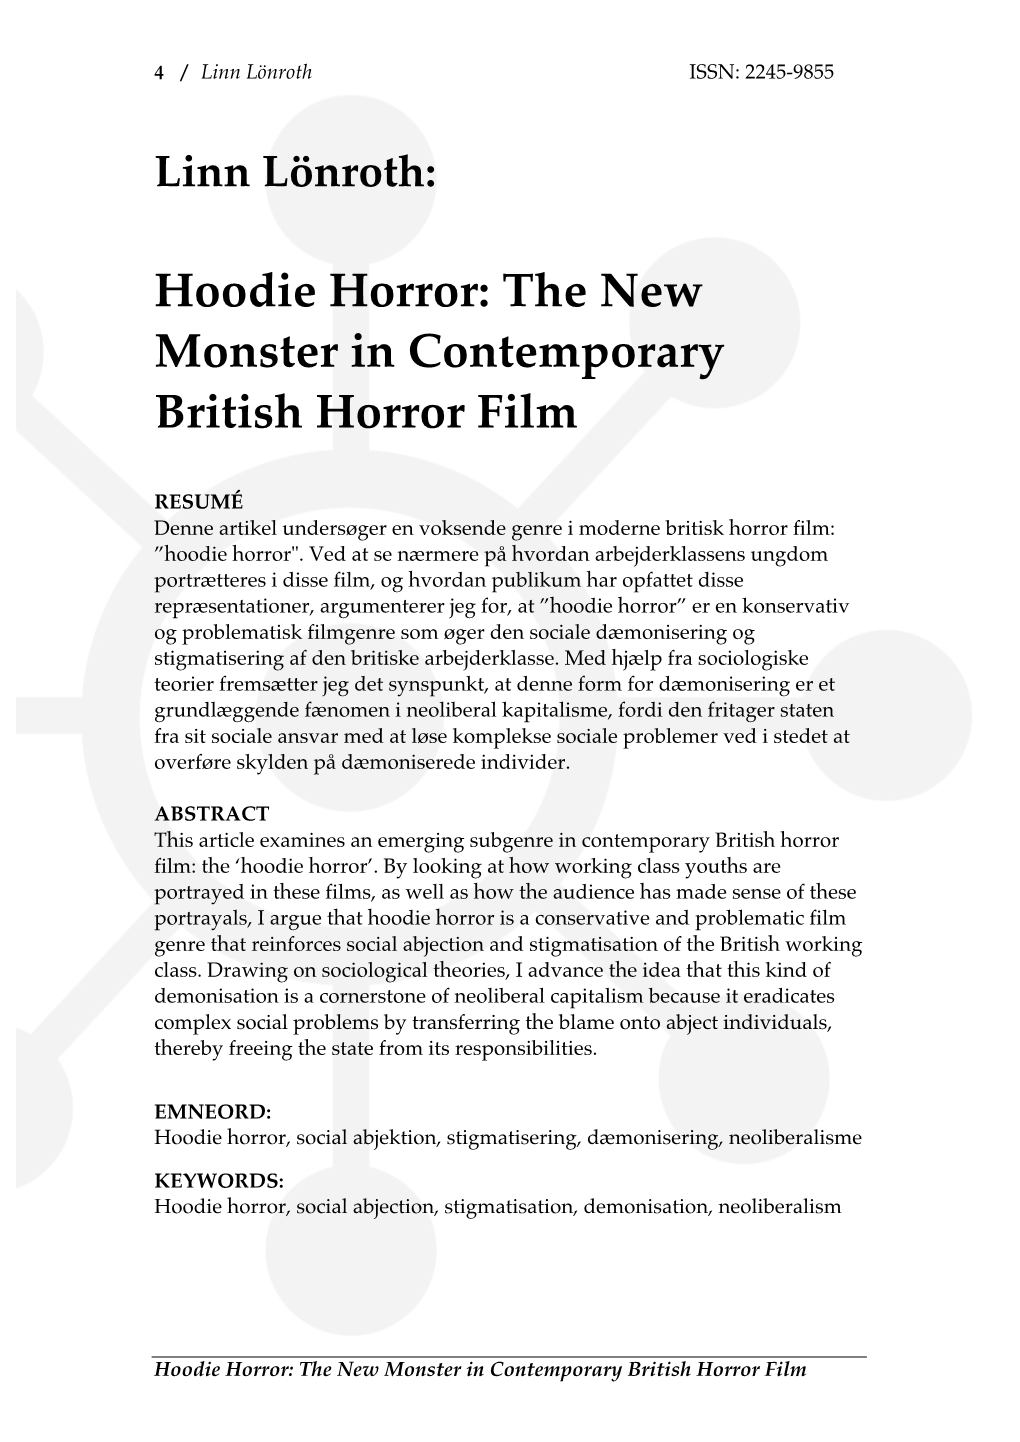 Hoodie Horror: the New Monster in Contemporary British Horror Film